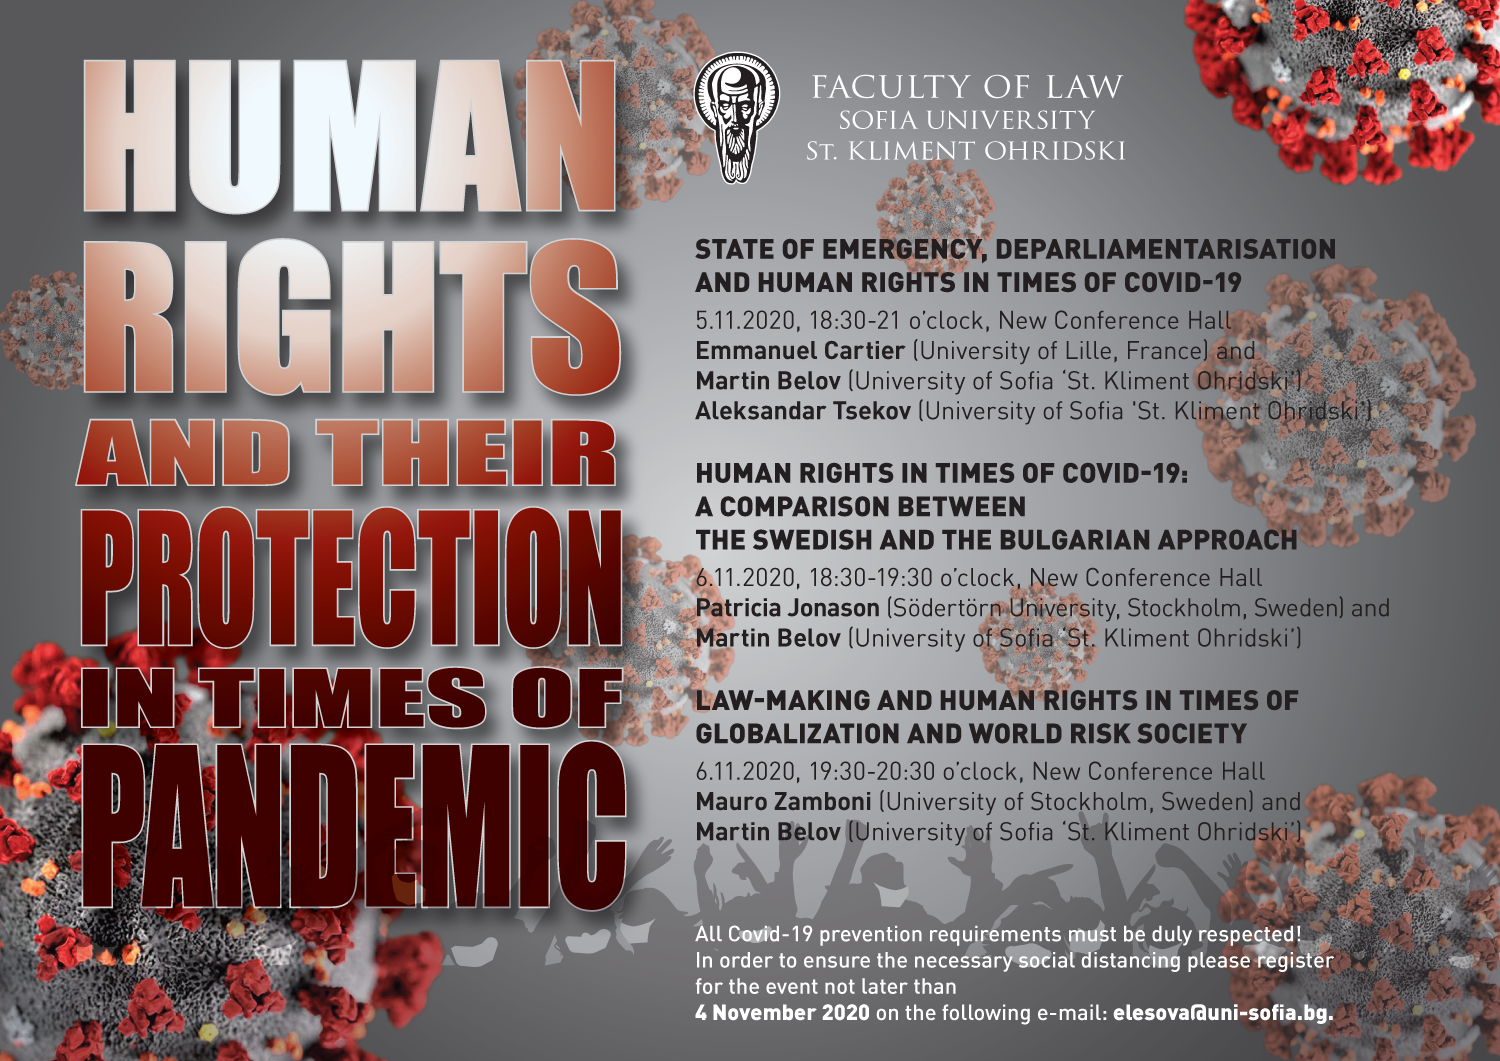 Human Rights and Their Protection in Times of Pandemic